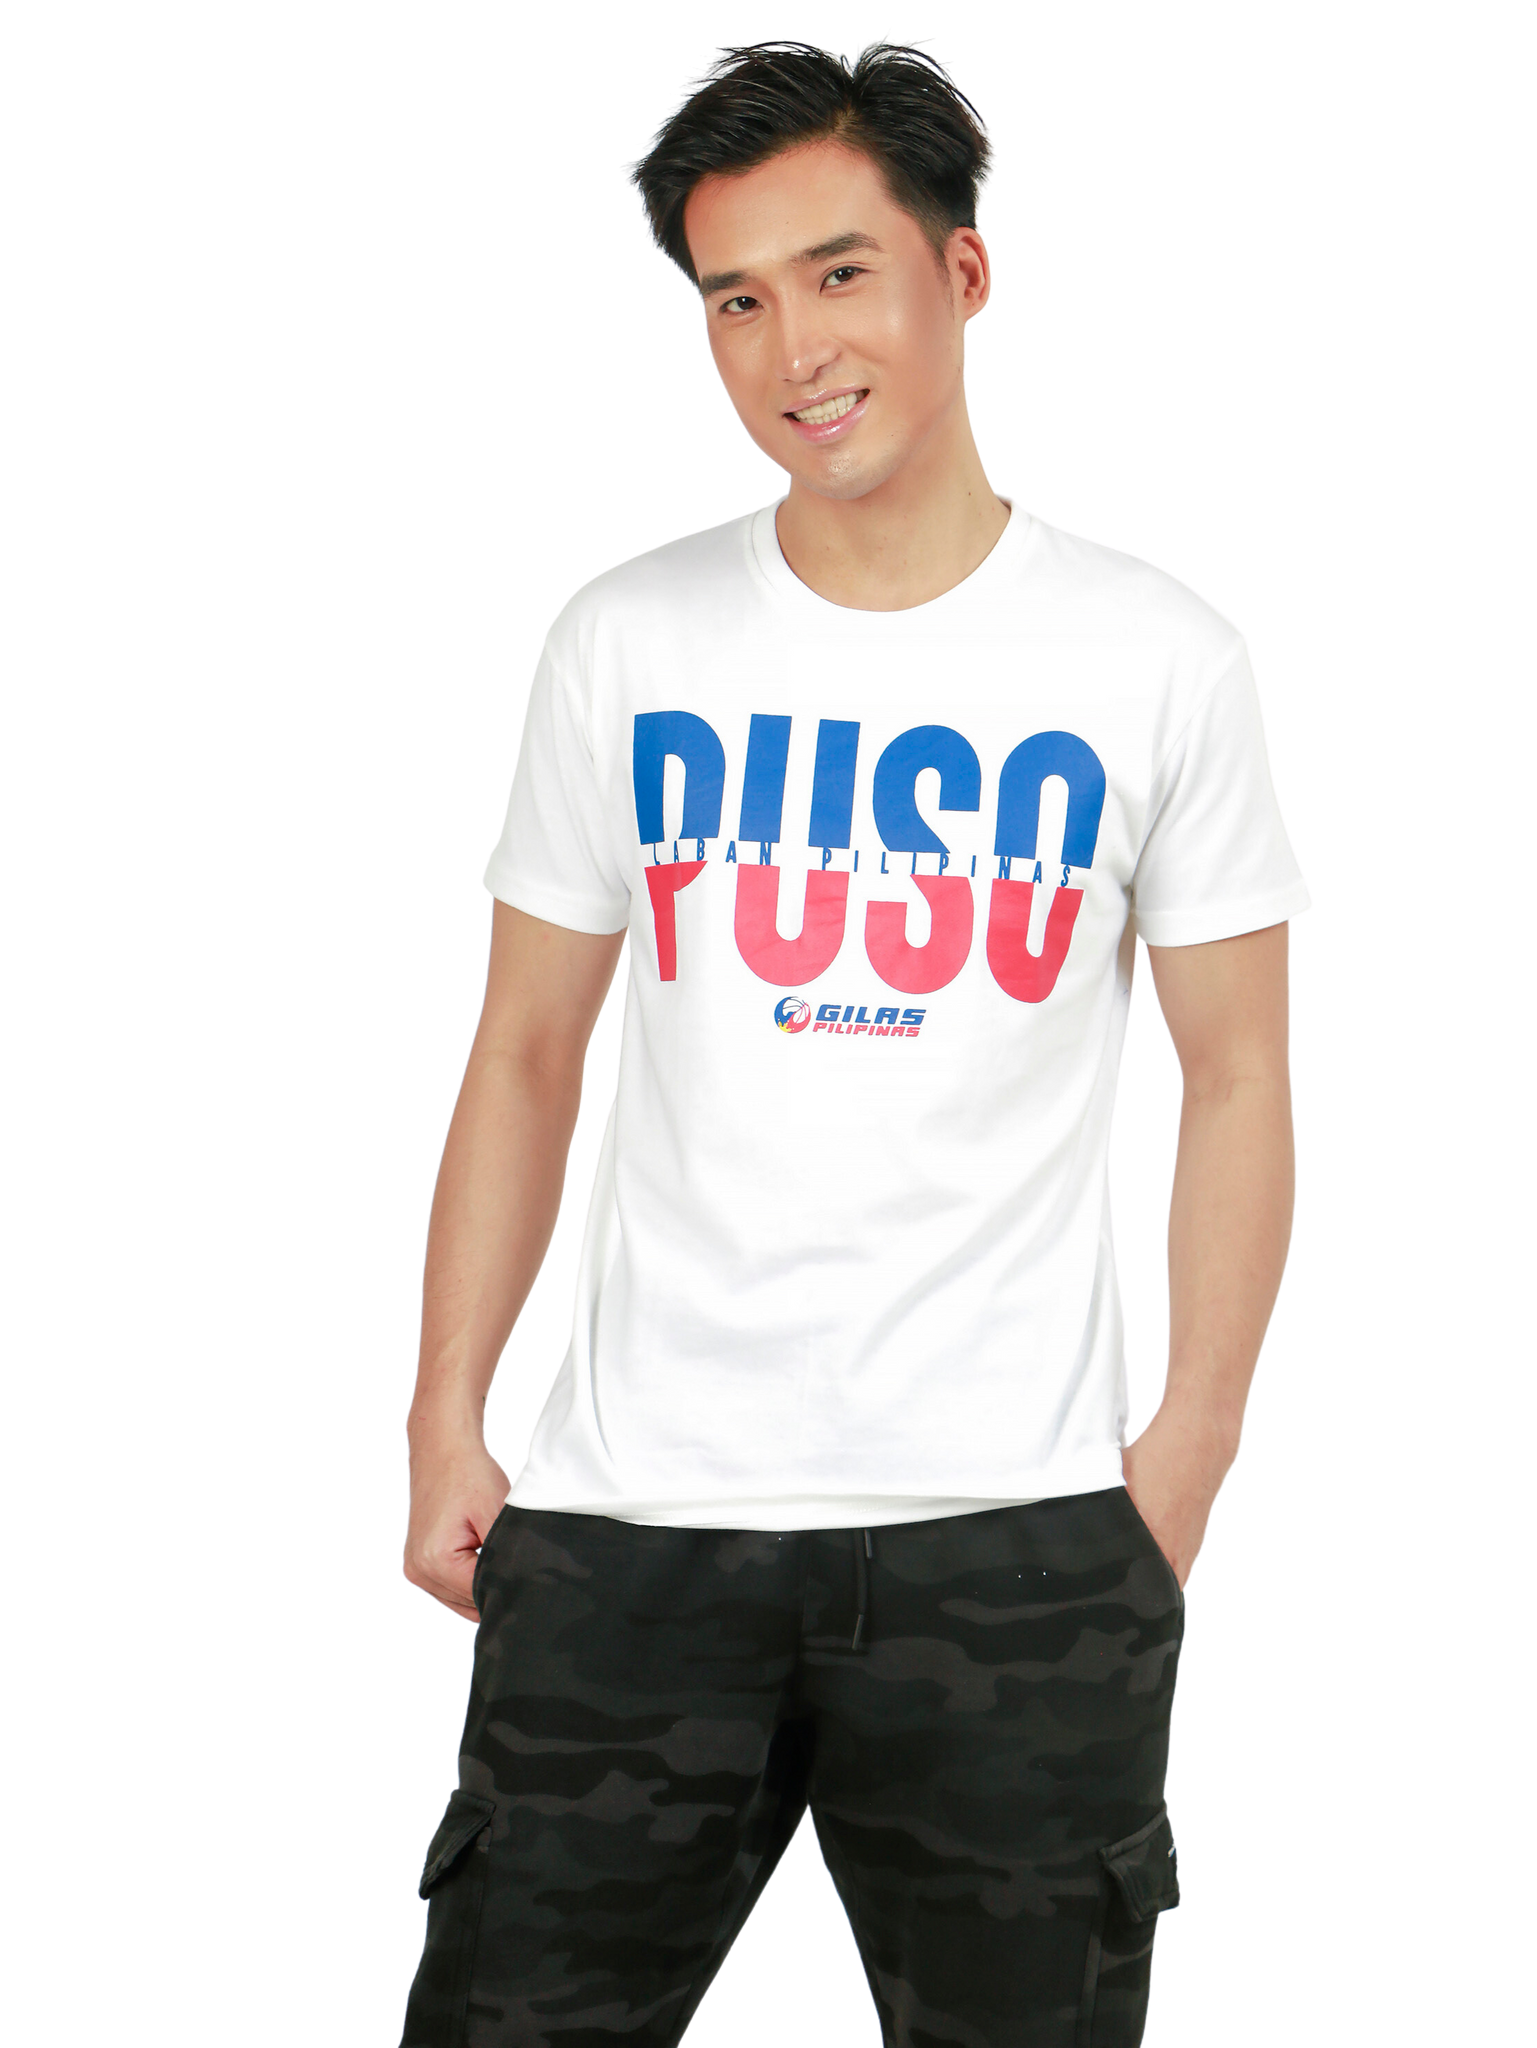 PUSO in White for Mens